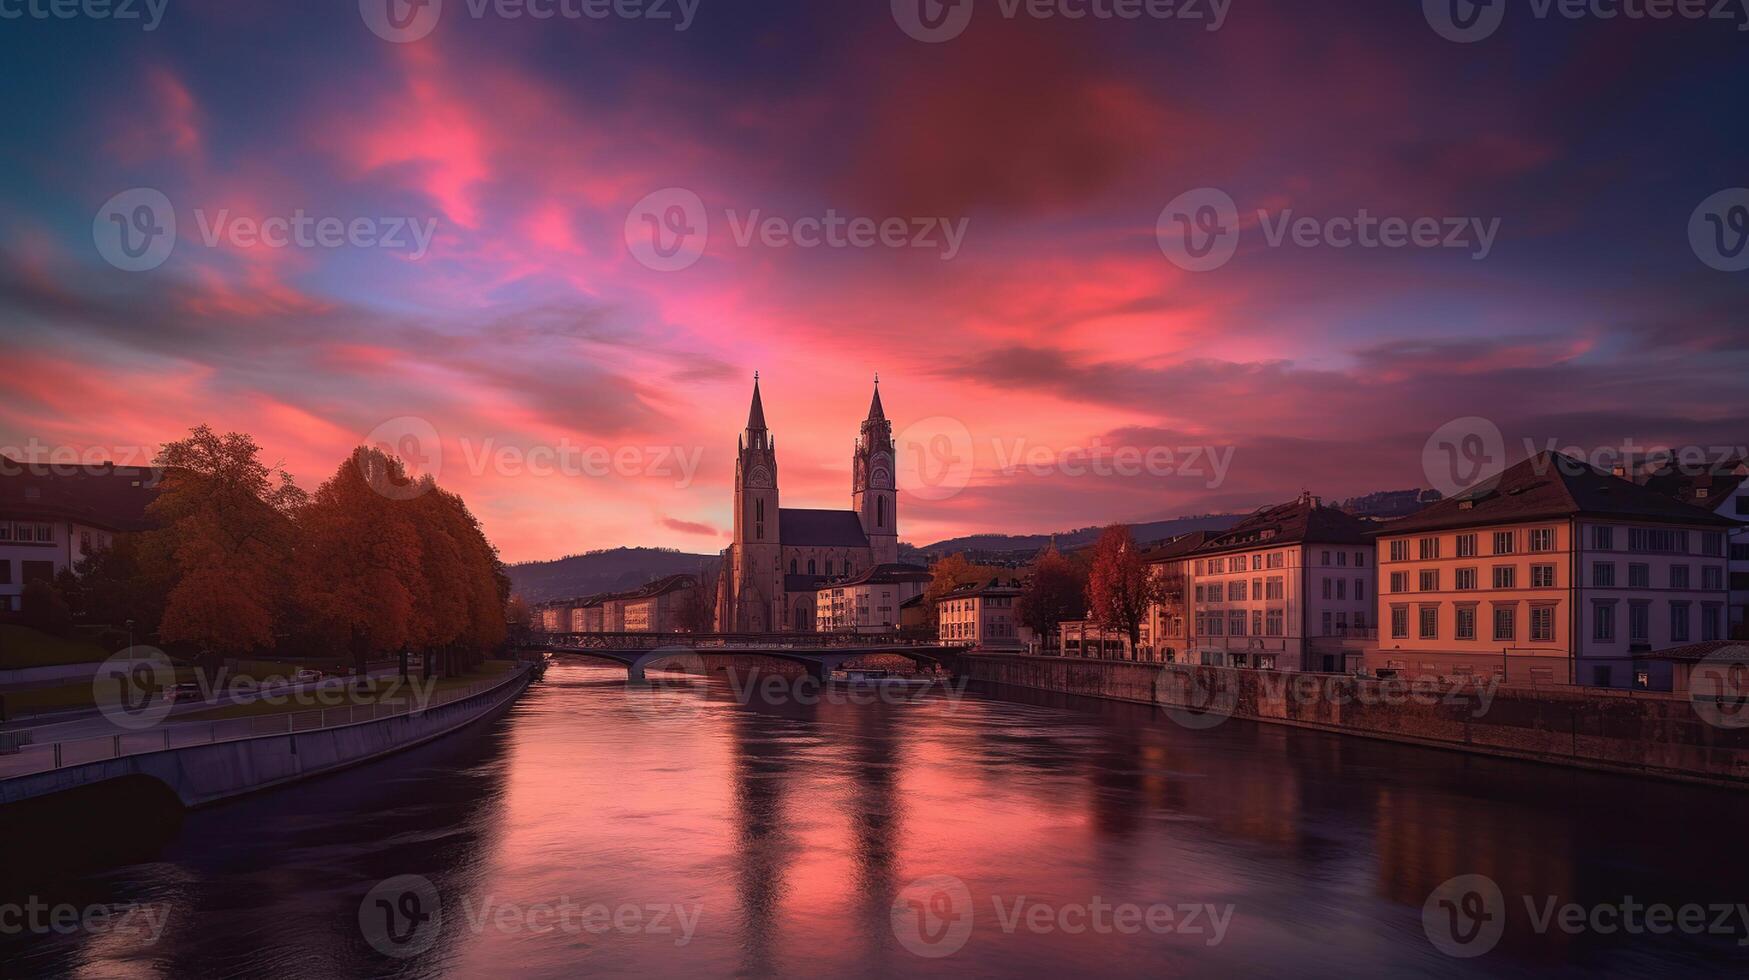 Cityscape image of Zurich with colorful sky, during dramatic sunset, photo